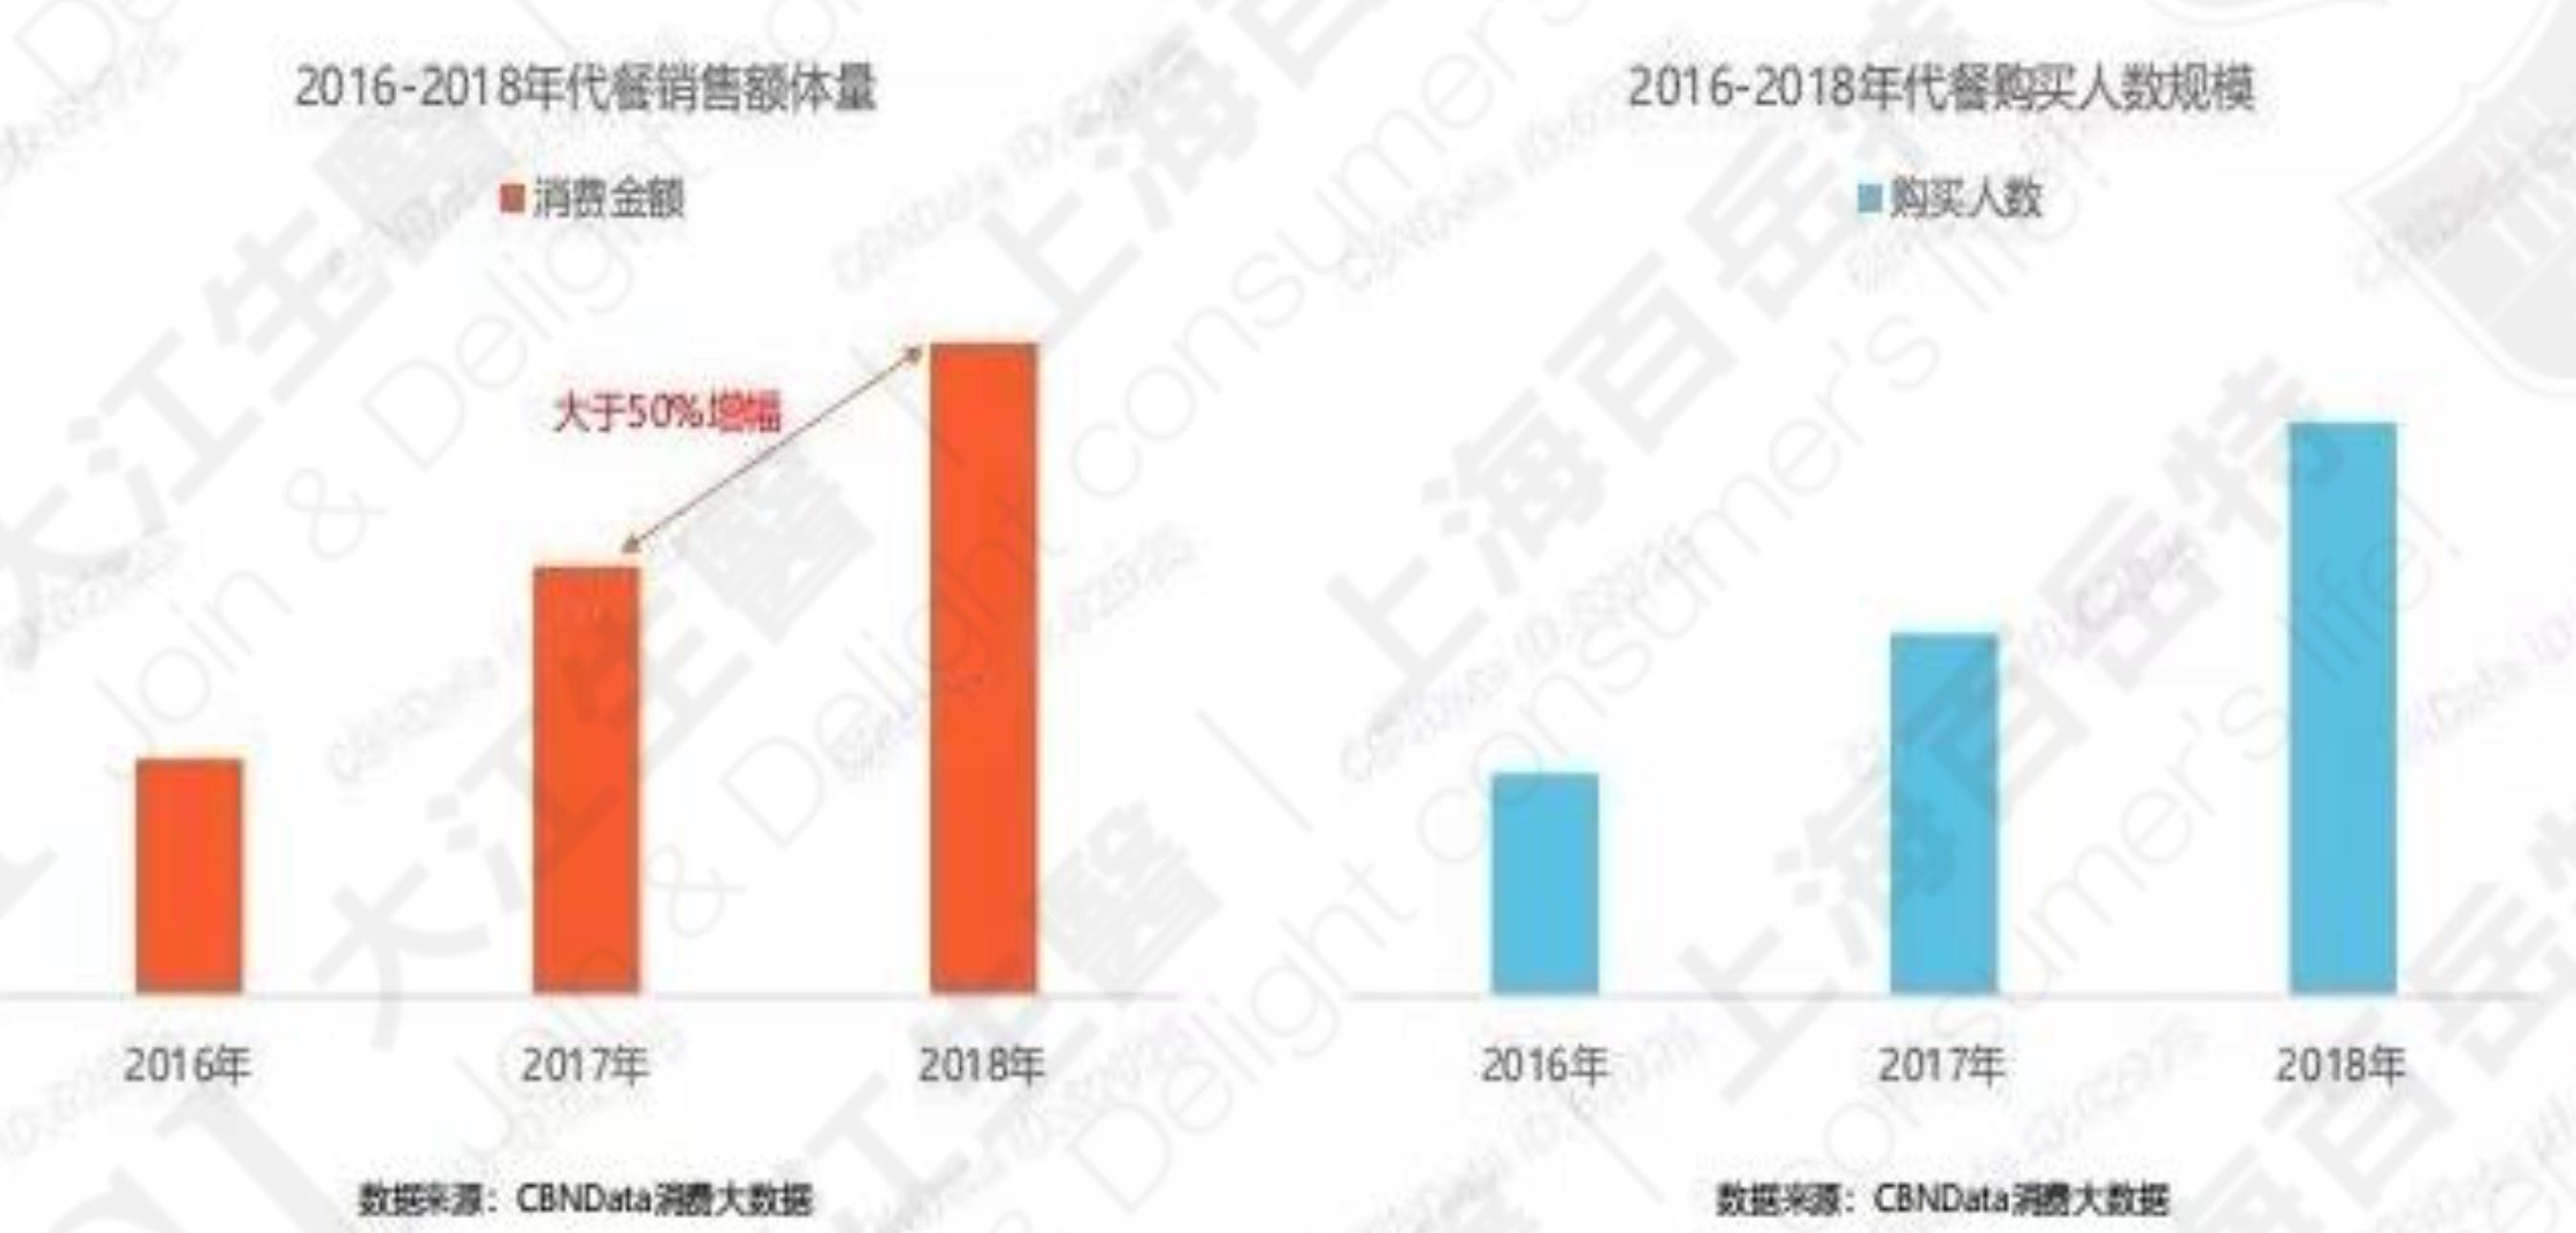 The number of meal replacements products sold on Tmall from 2016 to 2018, Data Source: Tmall